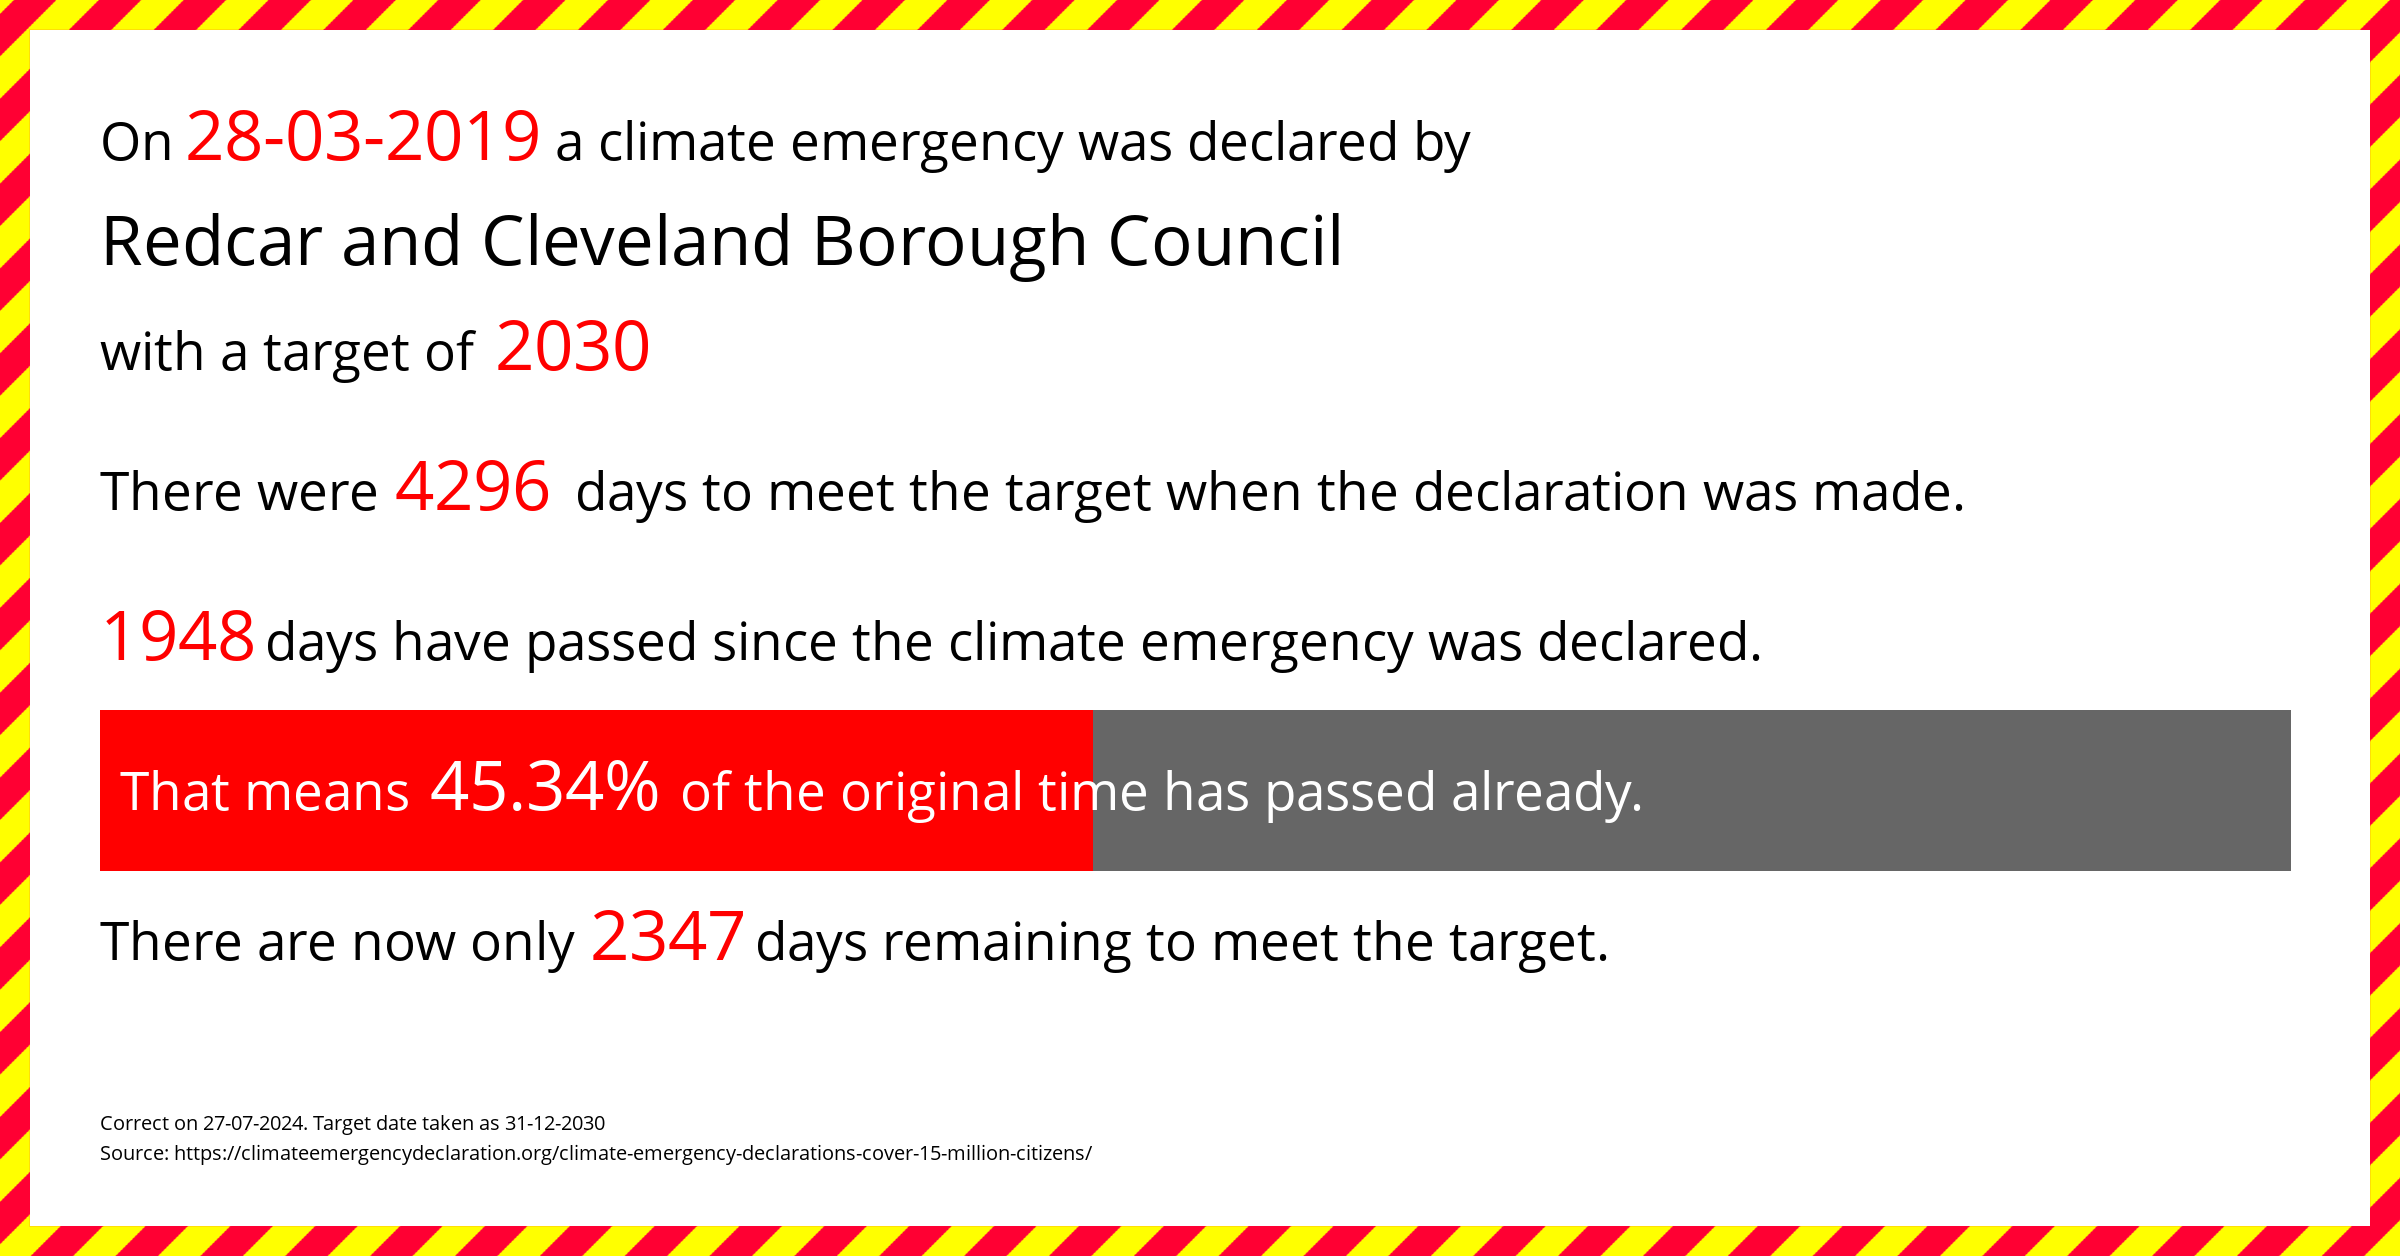 Redcar and Cleveland Borough Council declared a Climate emergency on Thursday 28th March 2019, with a target of 2030.